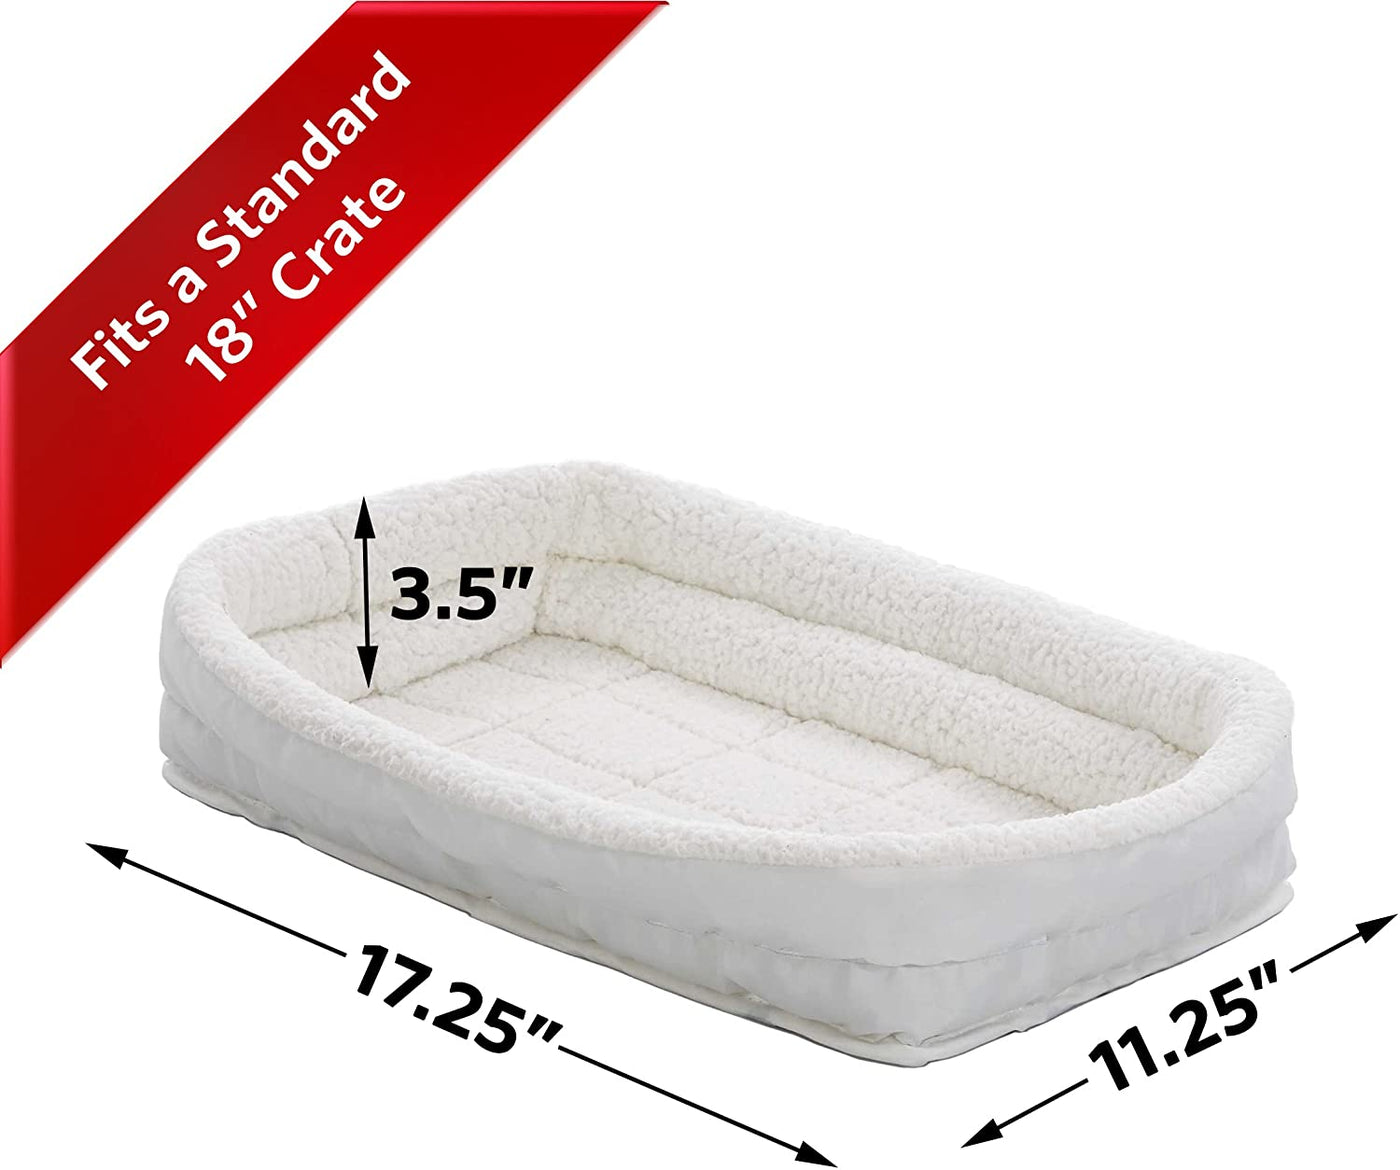 Double Bolster Pet Bed for Metal Dog Crates